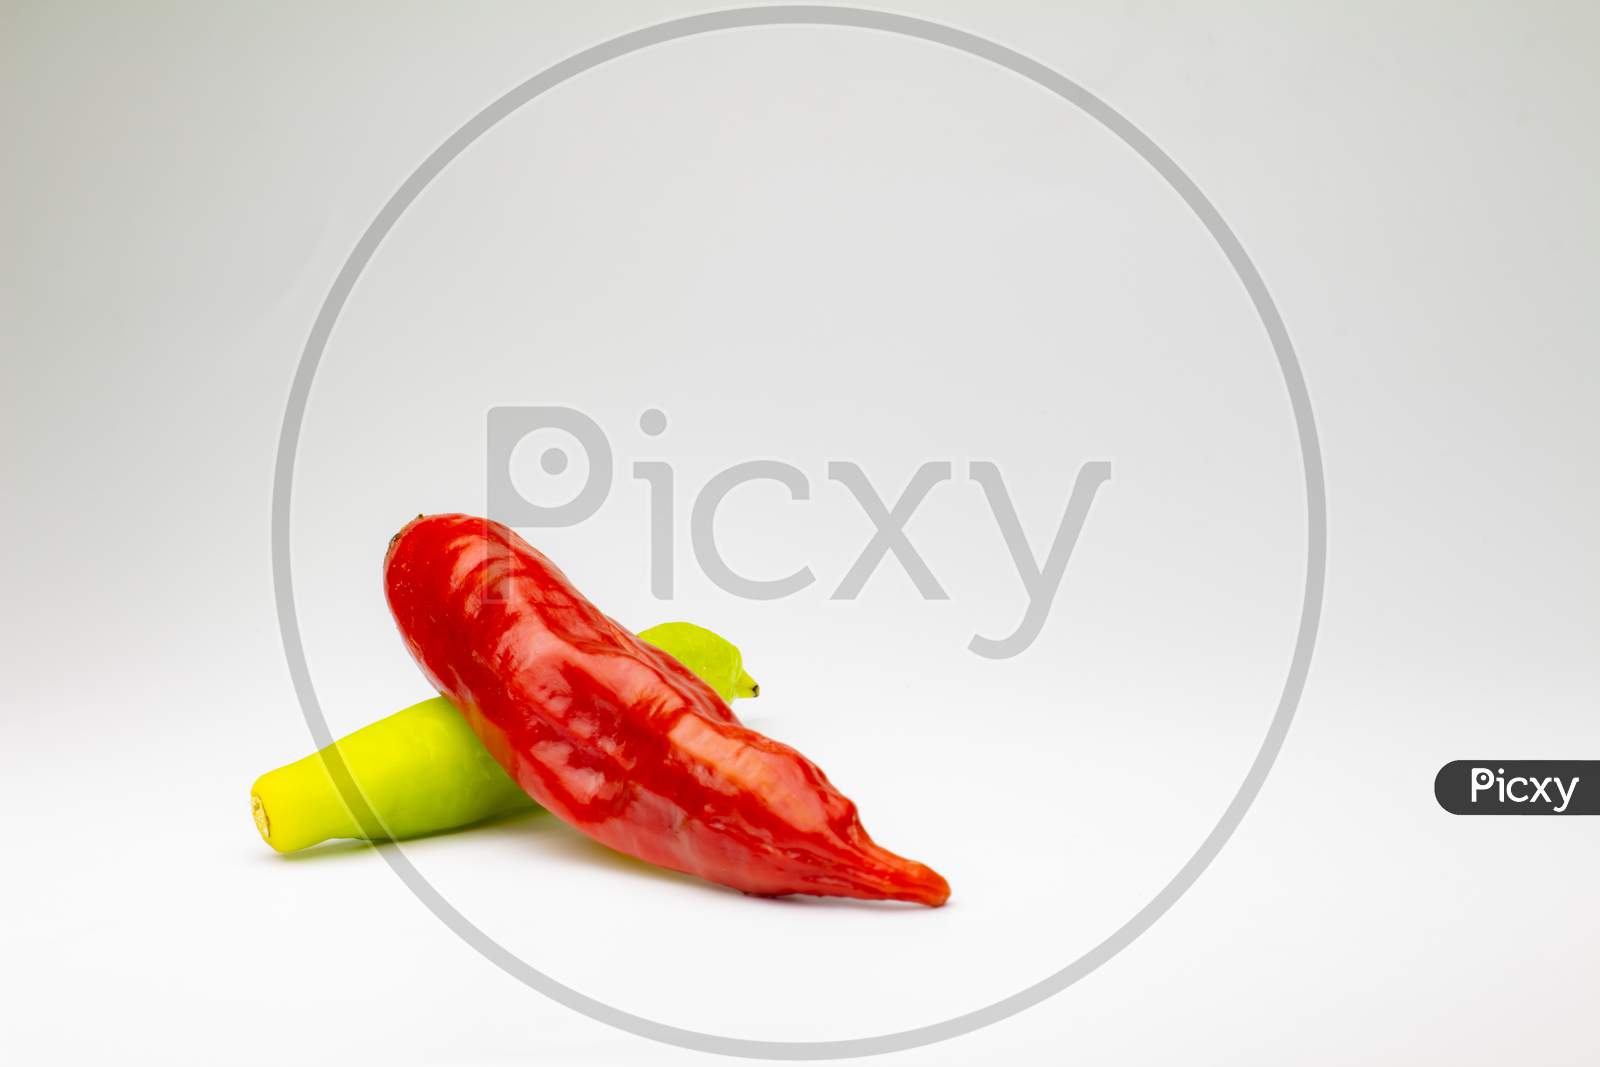 Small Red Chili Pepper On White Background. Free Space To Write. Spicy Food